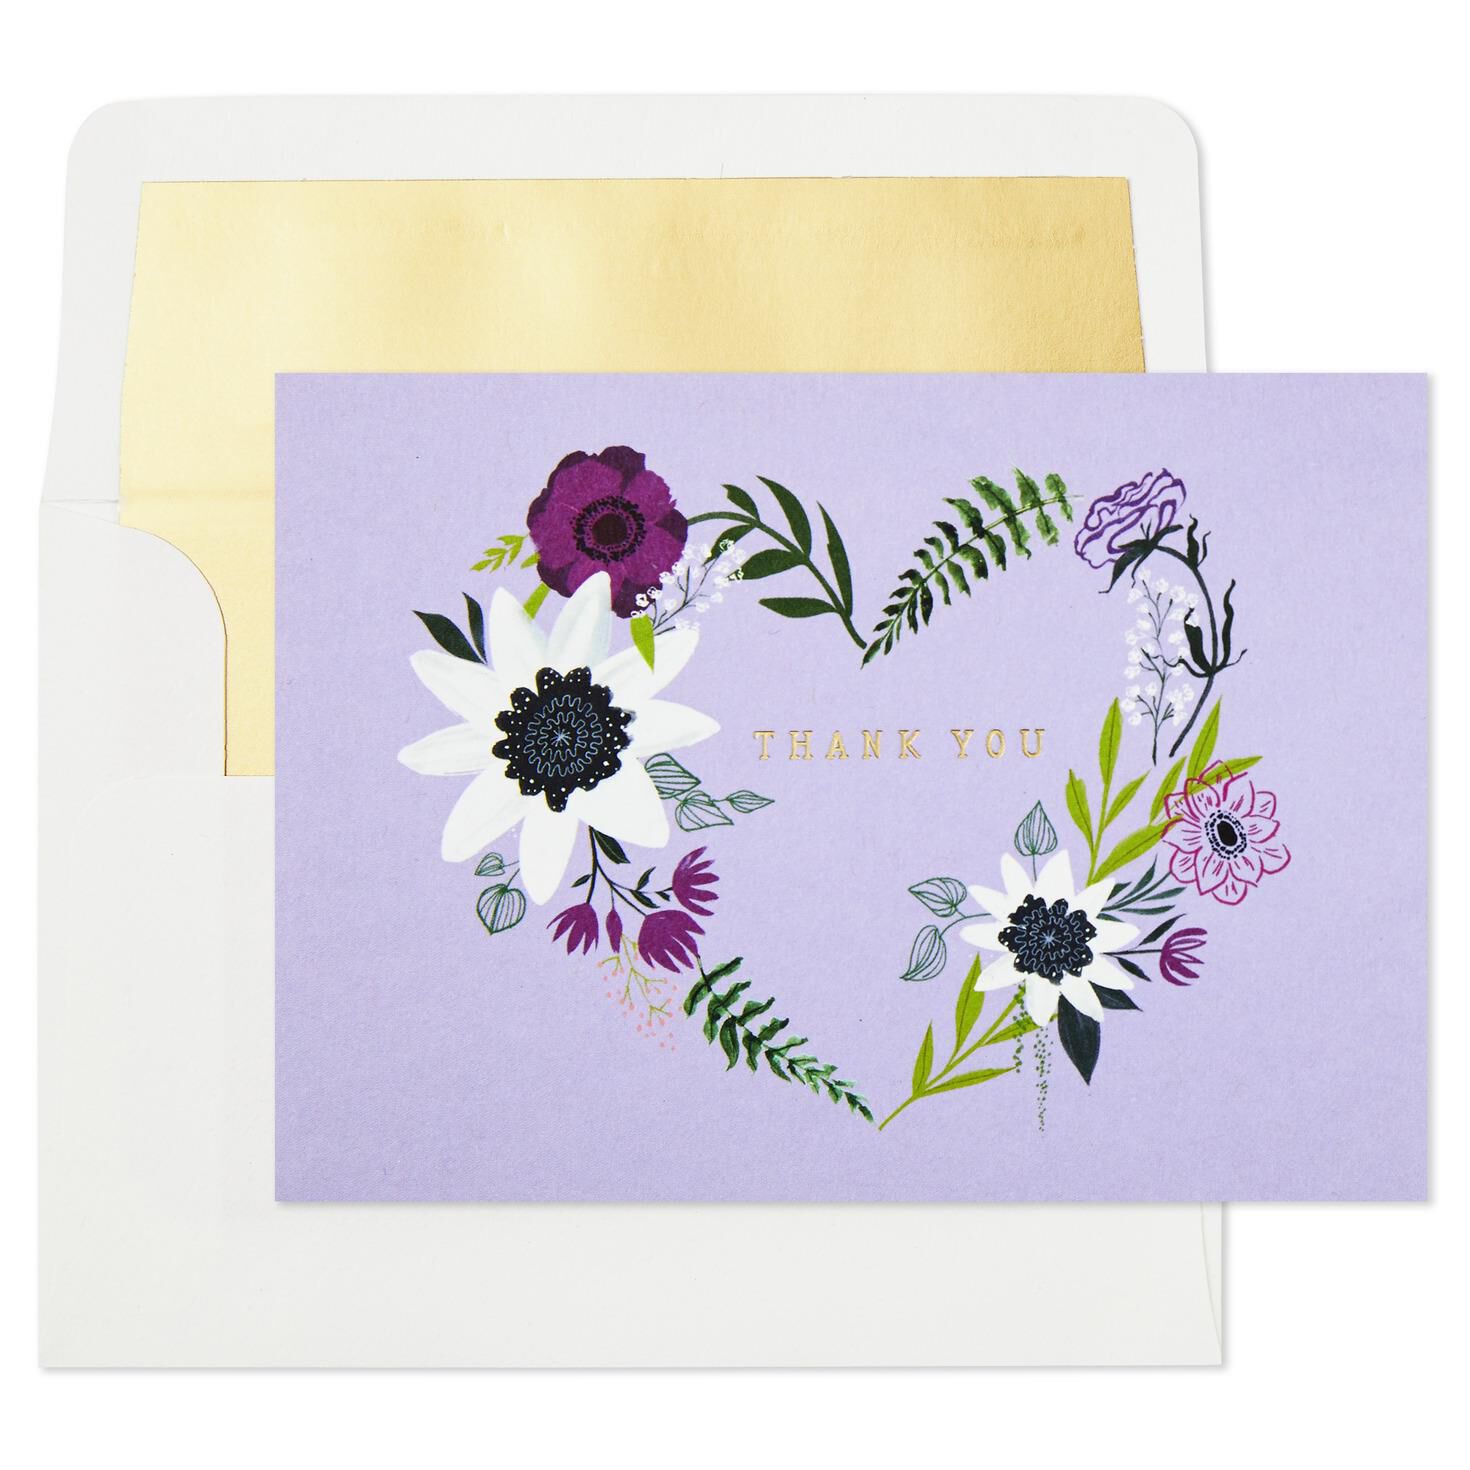 Floral Heart Wreath on Lavender Blank Thank You Notes, Pack of 10 for only USD 11.99 | Hallmark